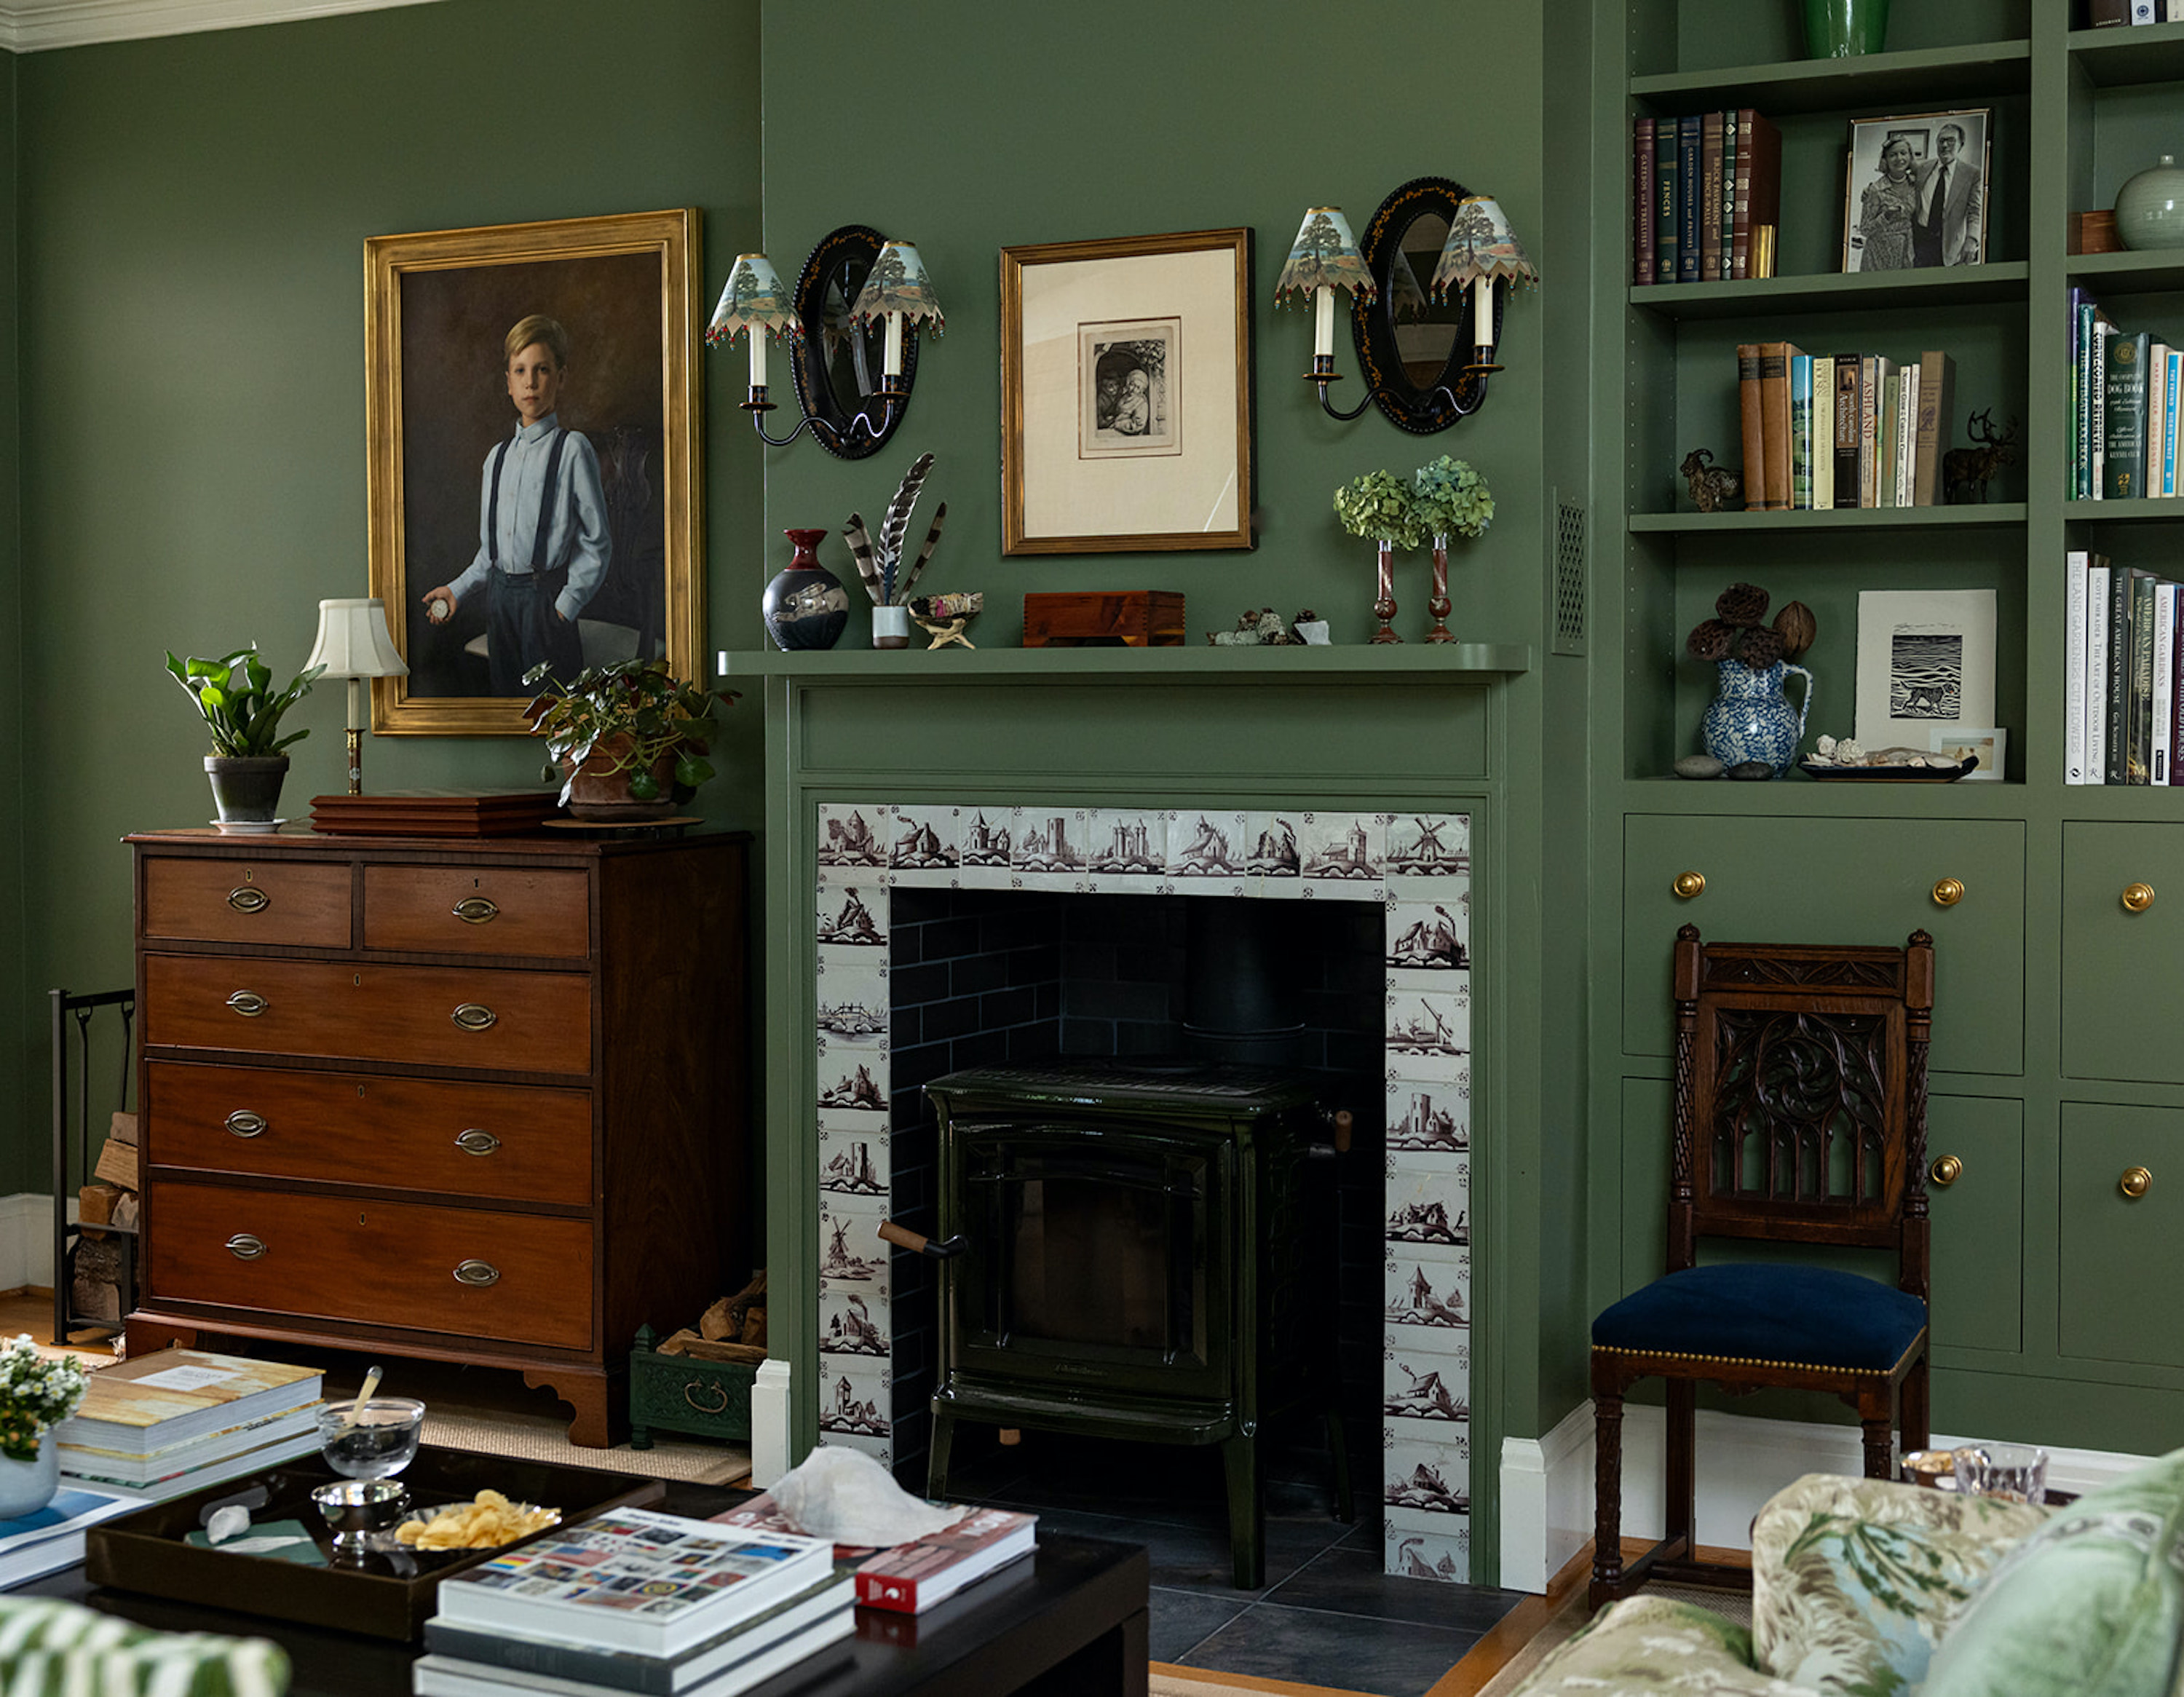 A living room with dark green walls and a tiled fireplace